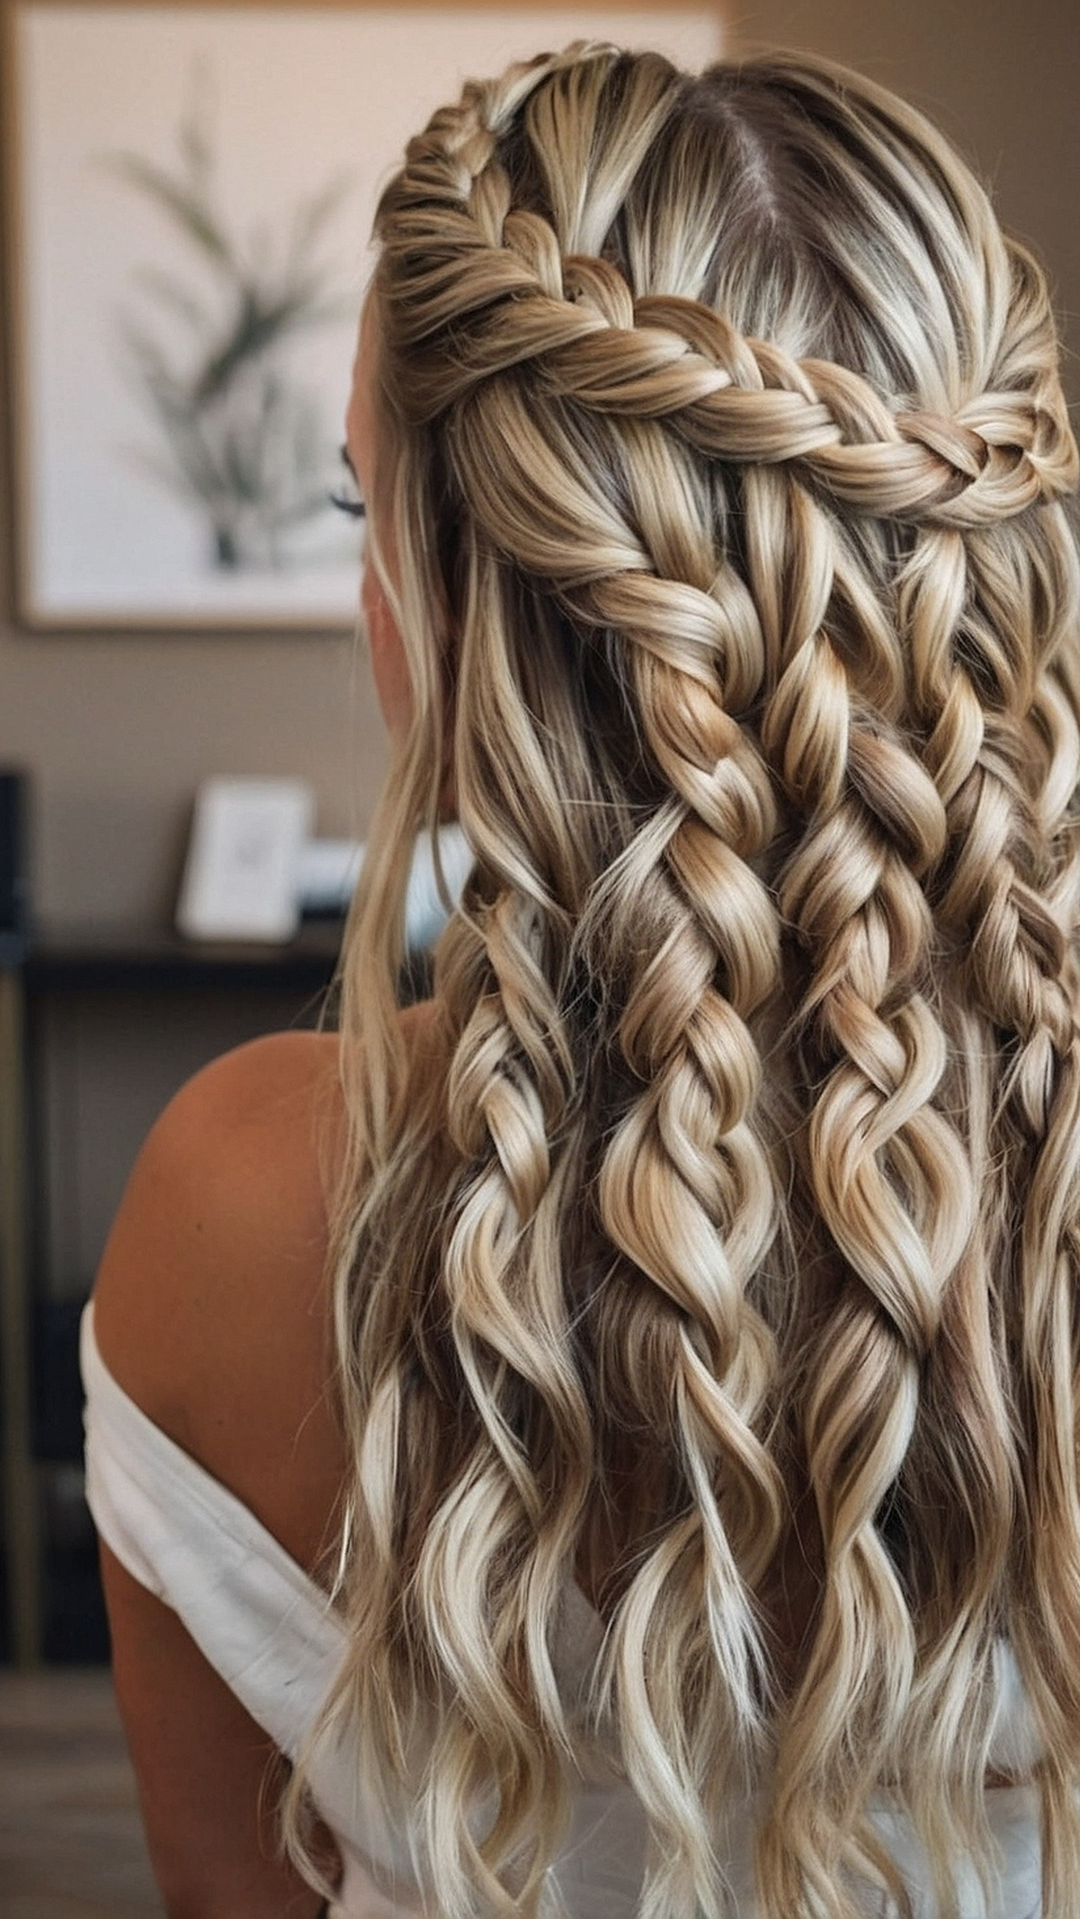 Tress Trends: Pretty Braided Hairstyles to Try